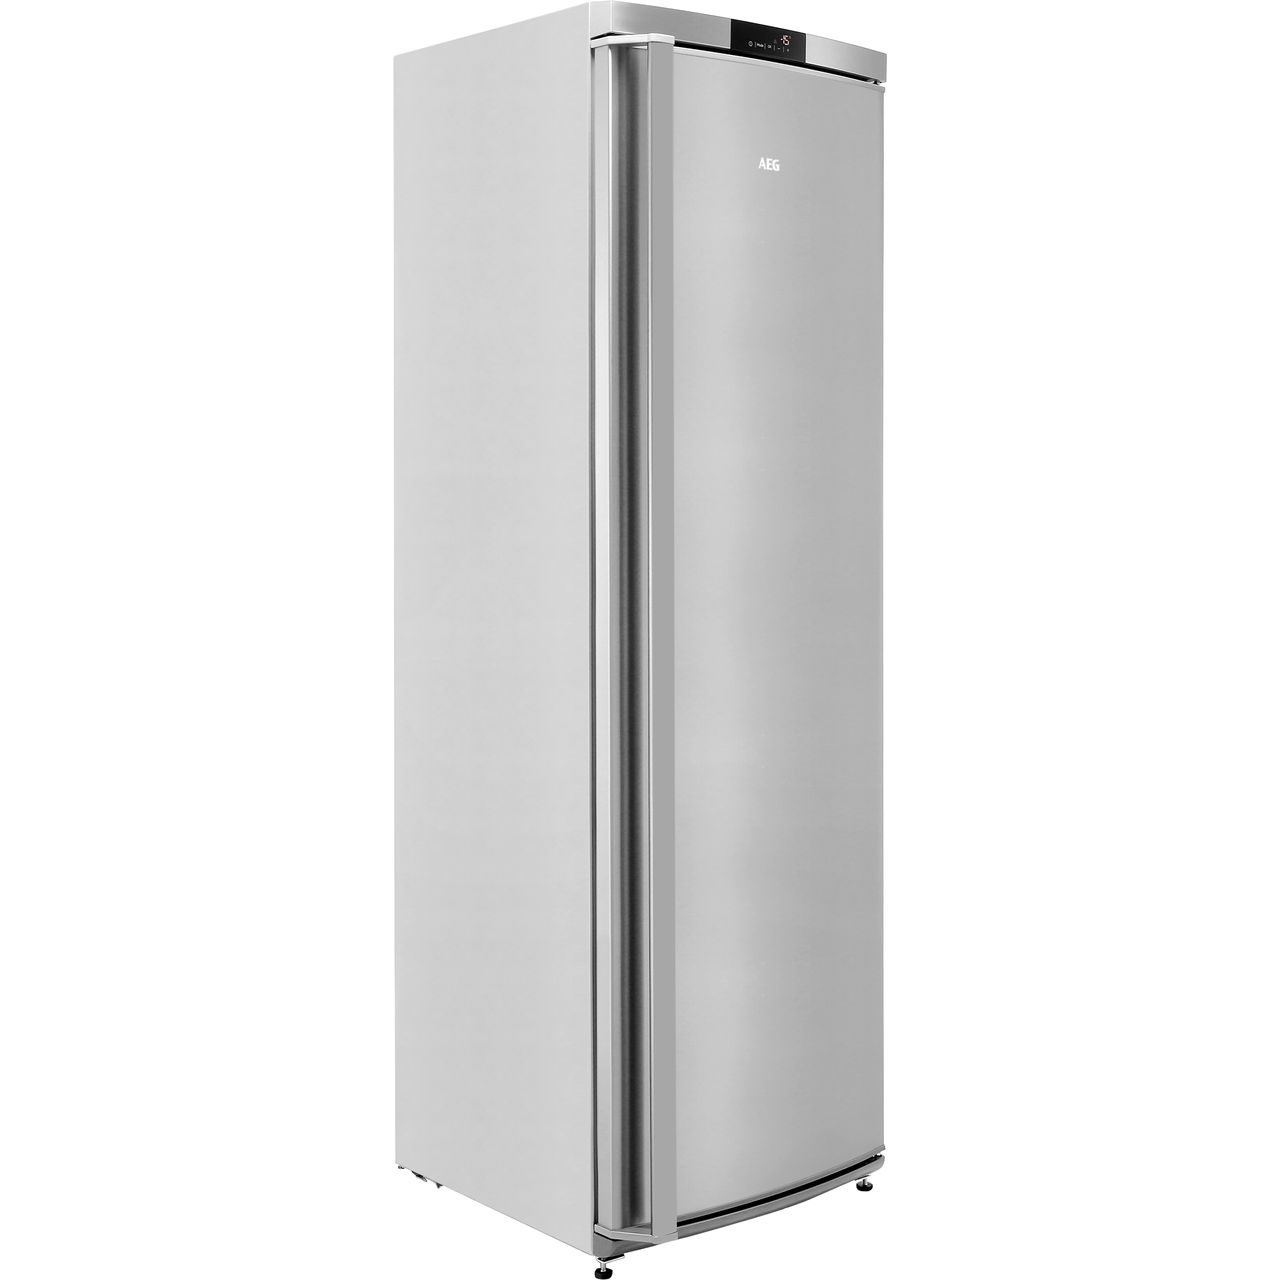 AEG AGE62526NW Frost Free Upright Freezer Review